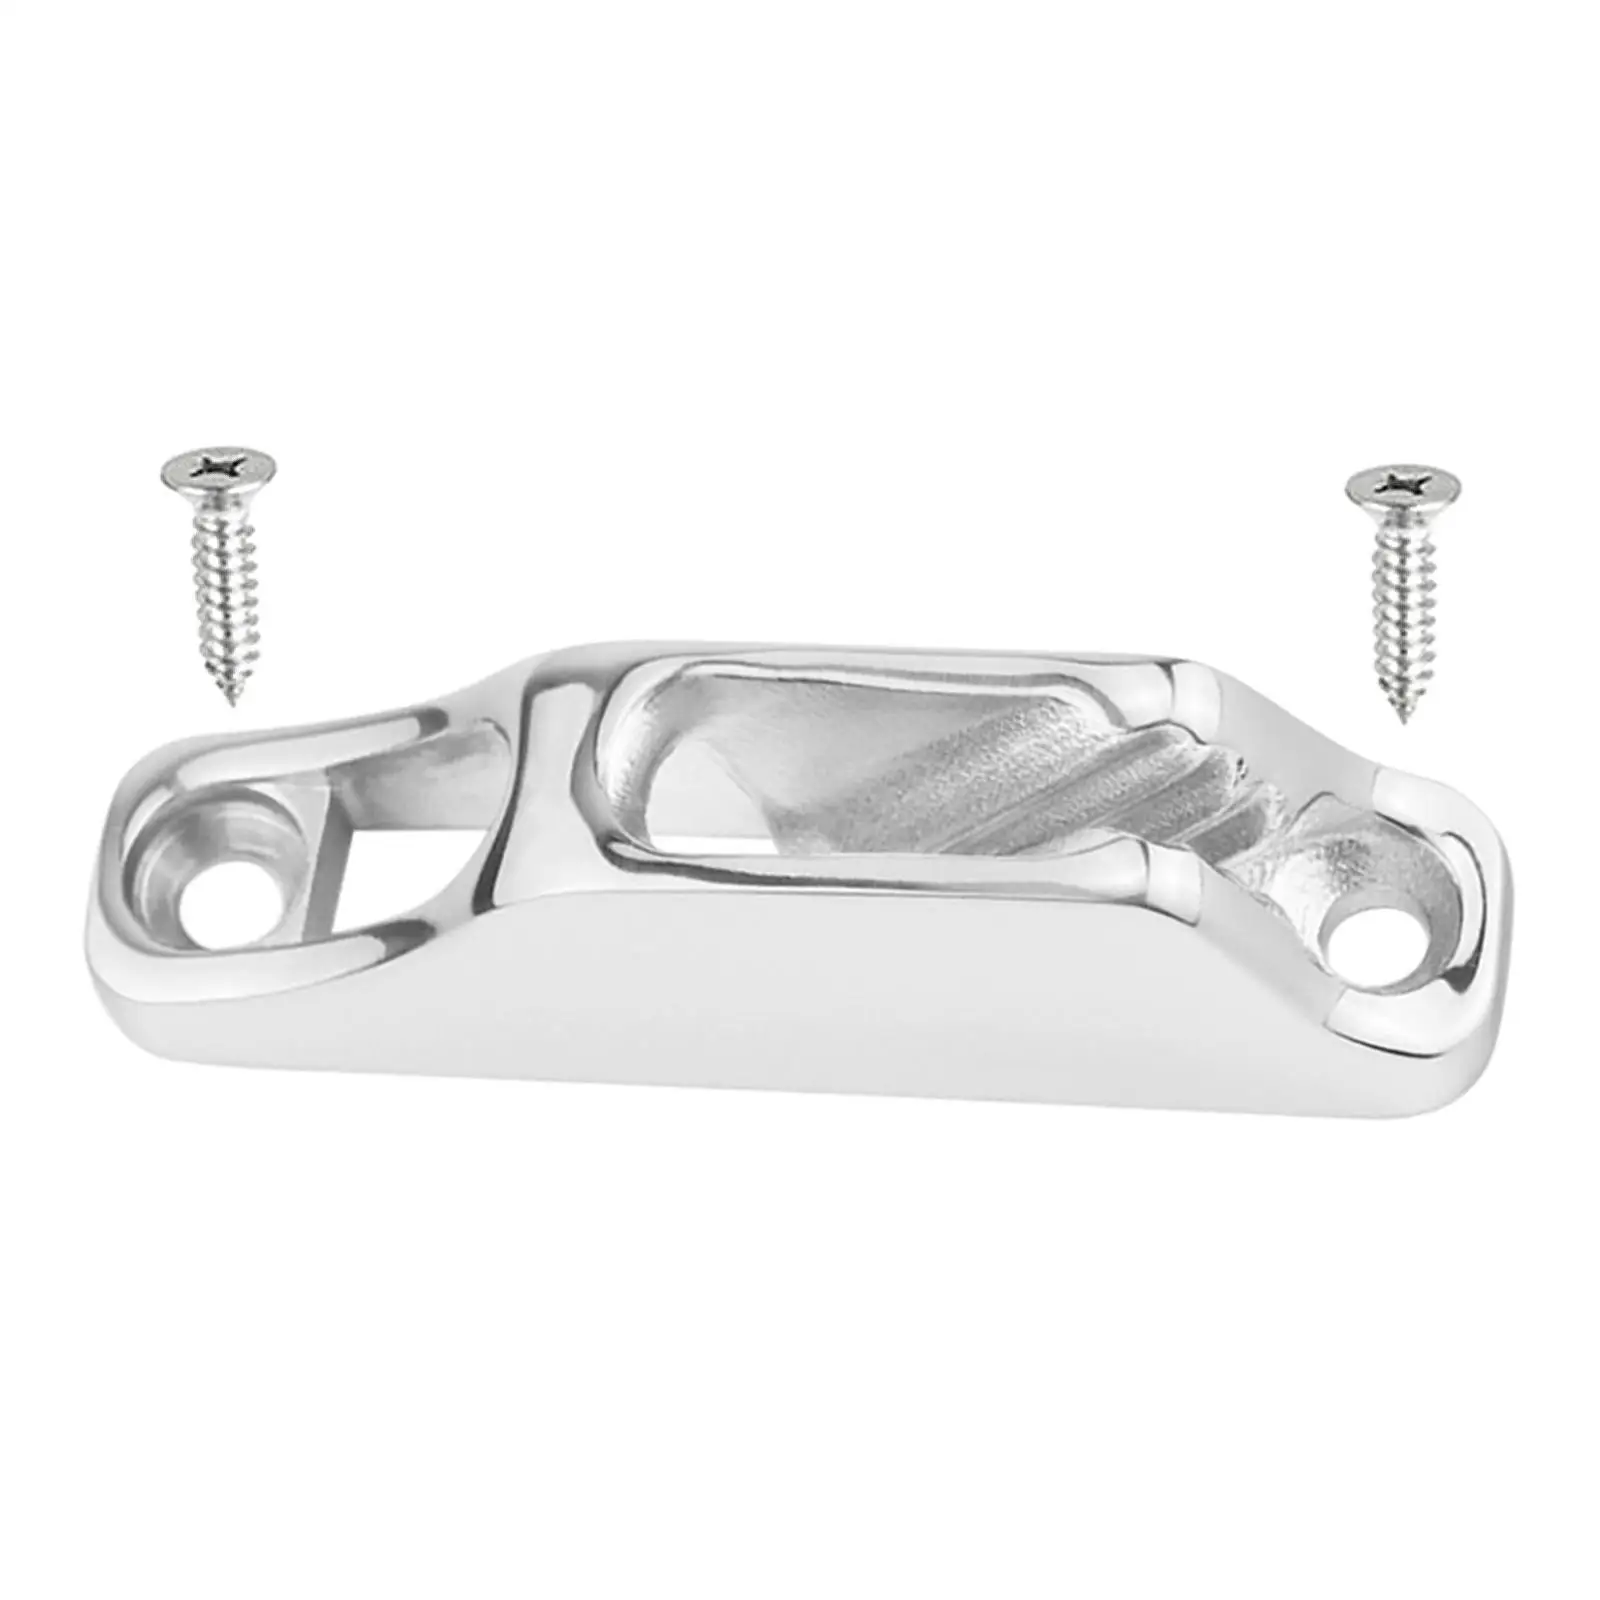 

316 Marine Grade Stainless Steel Durable Boat Rope Clam Cleat Hardware Sailing Kayak Marine Accessories Silver